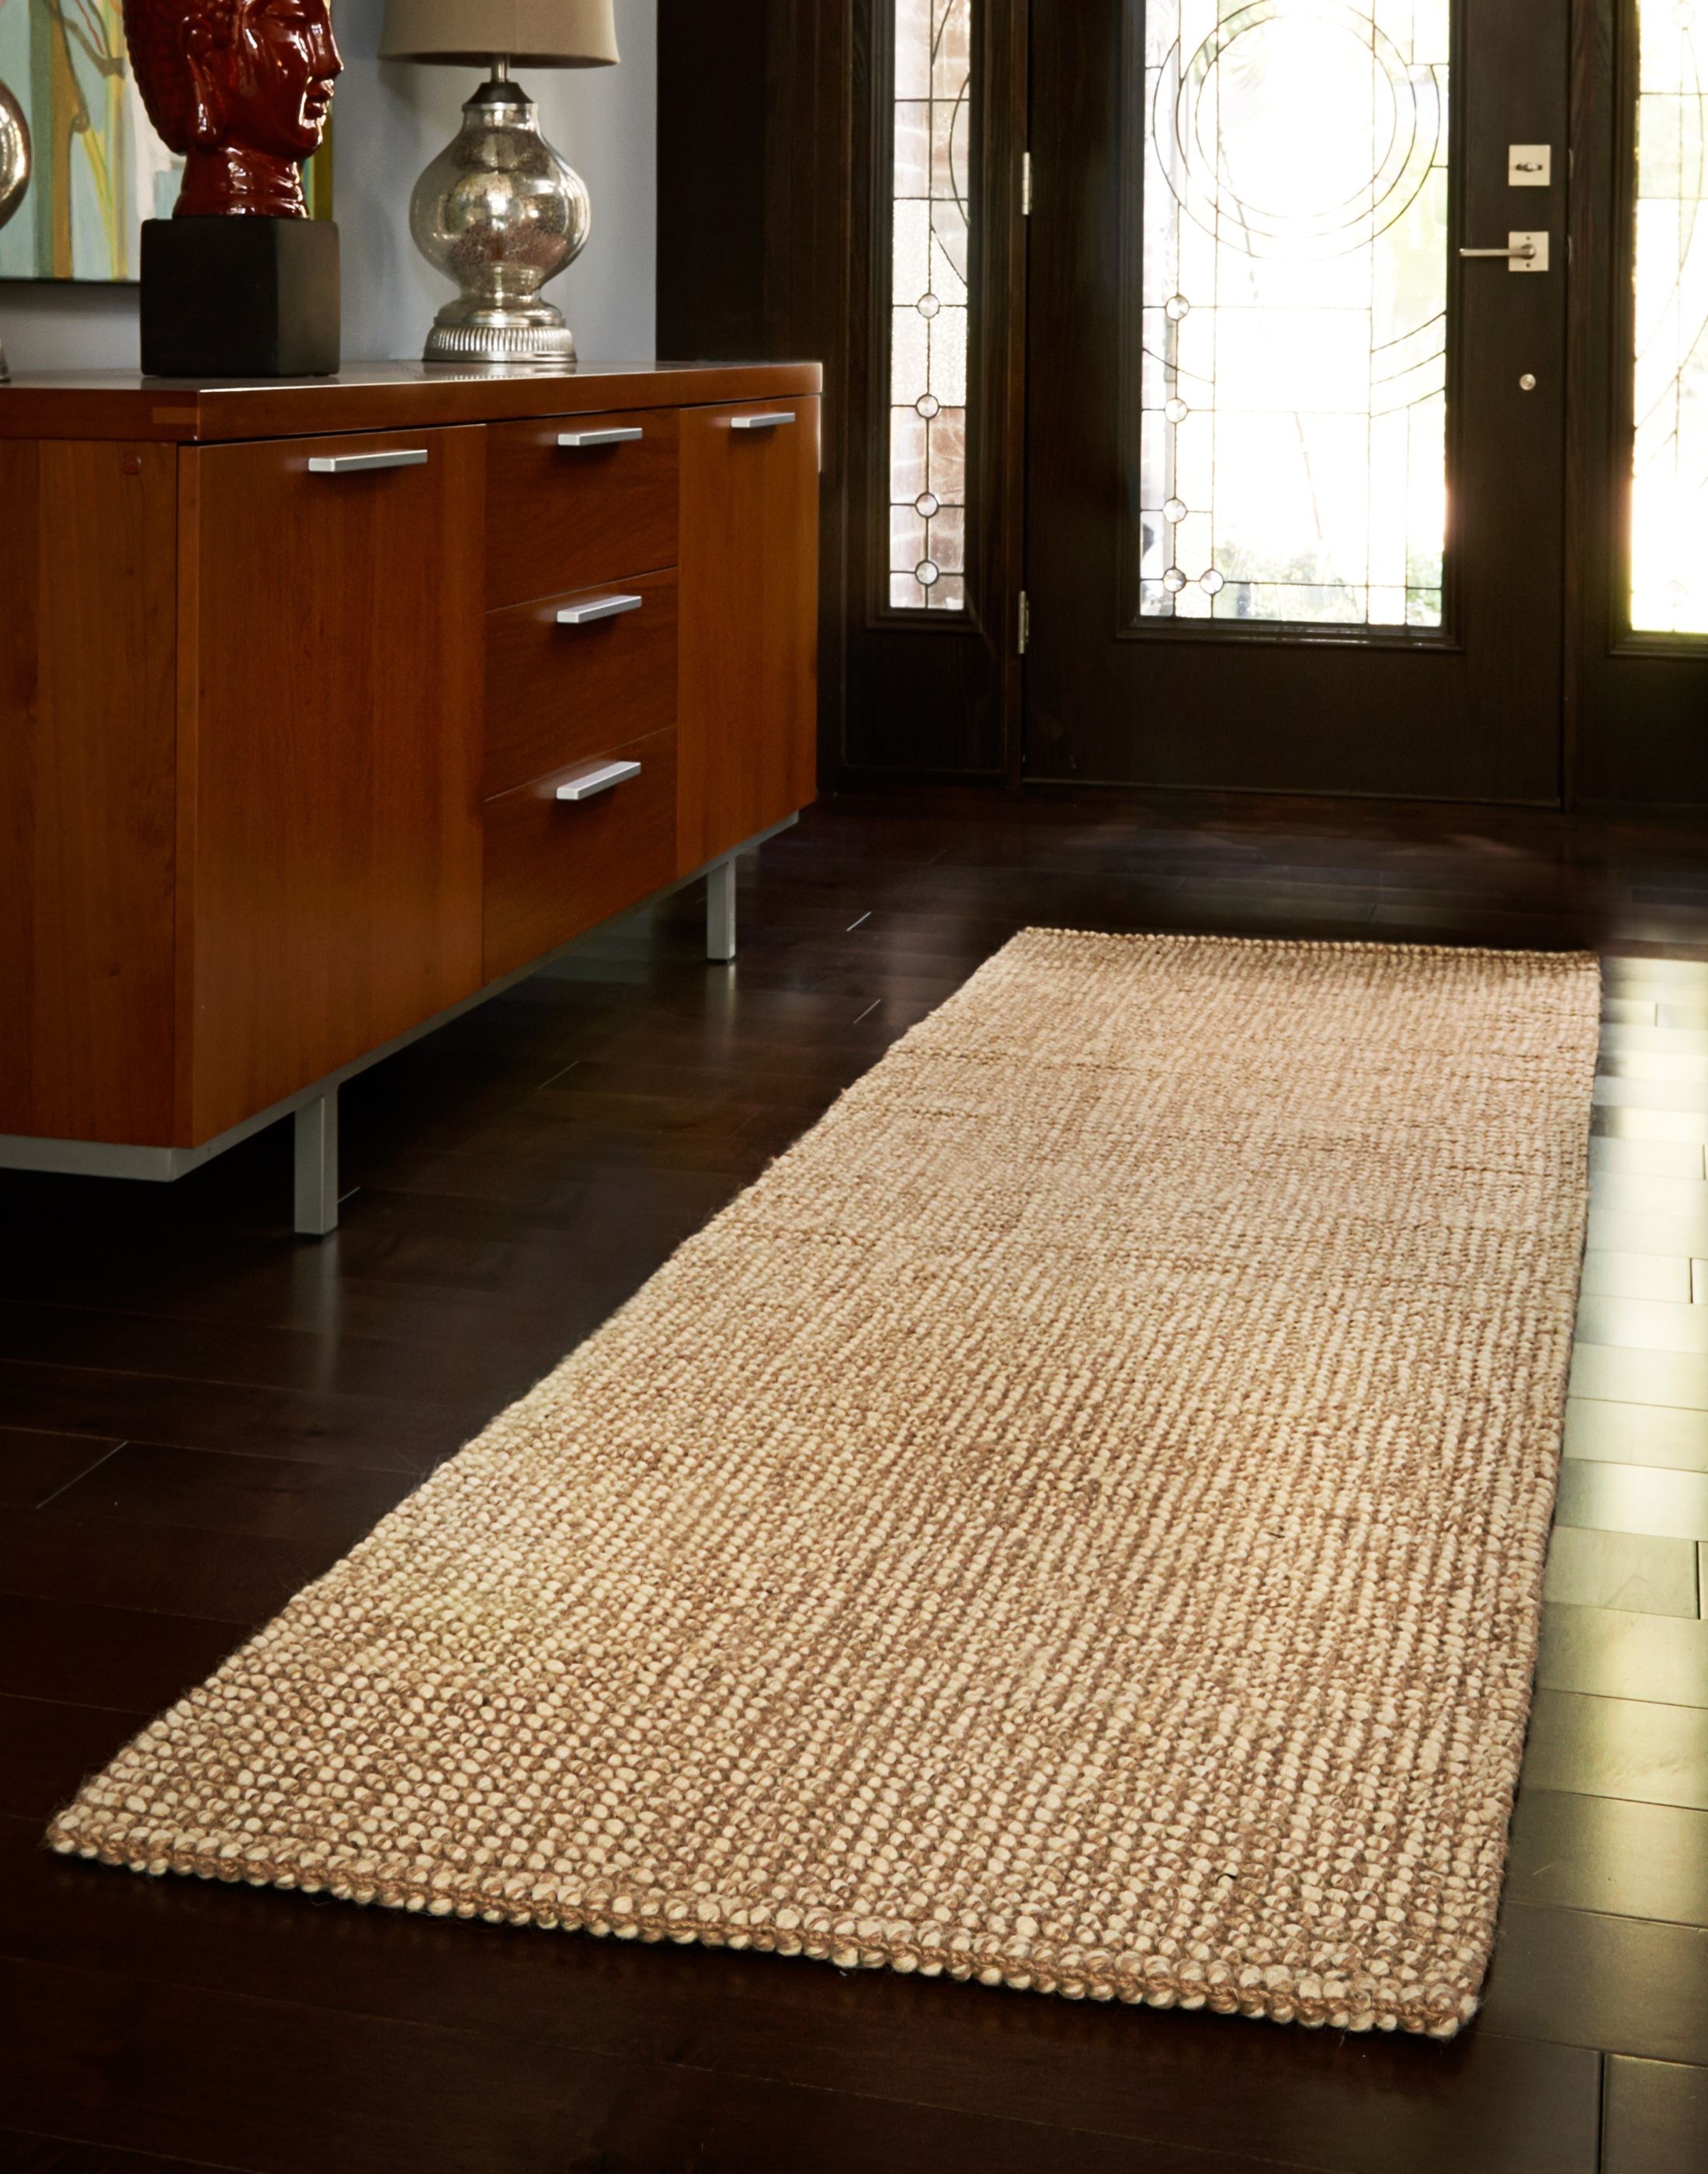 Area Rugs Outstanding Runner Rugs For Hallway Rug Runners With With Regard To Long Runner Rugs Hallway (View 6 of 20)